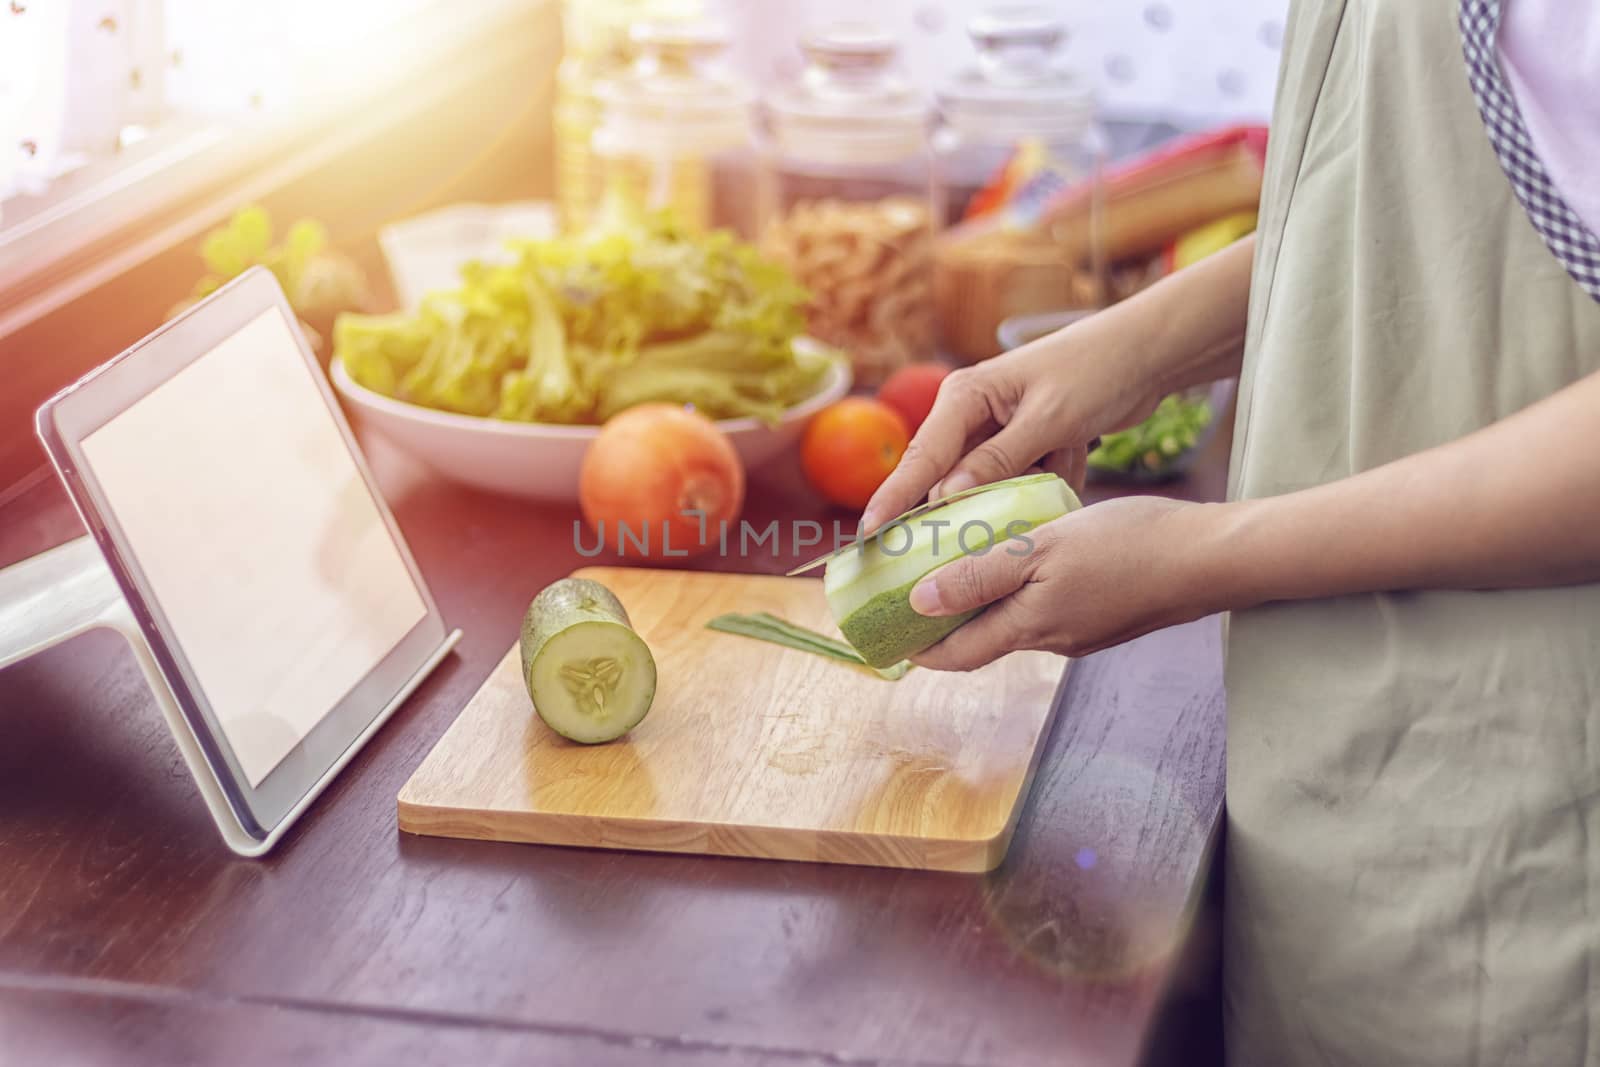 female hand slicing green vegetable, prepare ingredients for cooking follow cooking online video clip on website via tablet. cooking content on internet technology for modern lifestyle concept by asiandelight